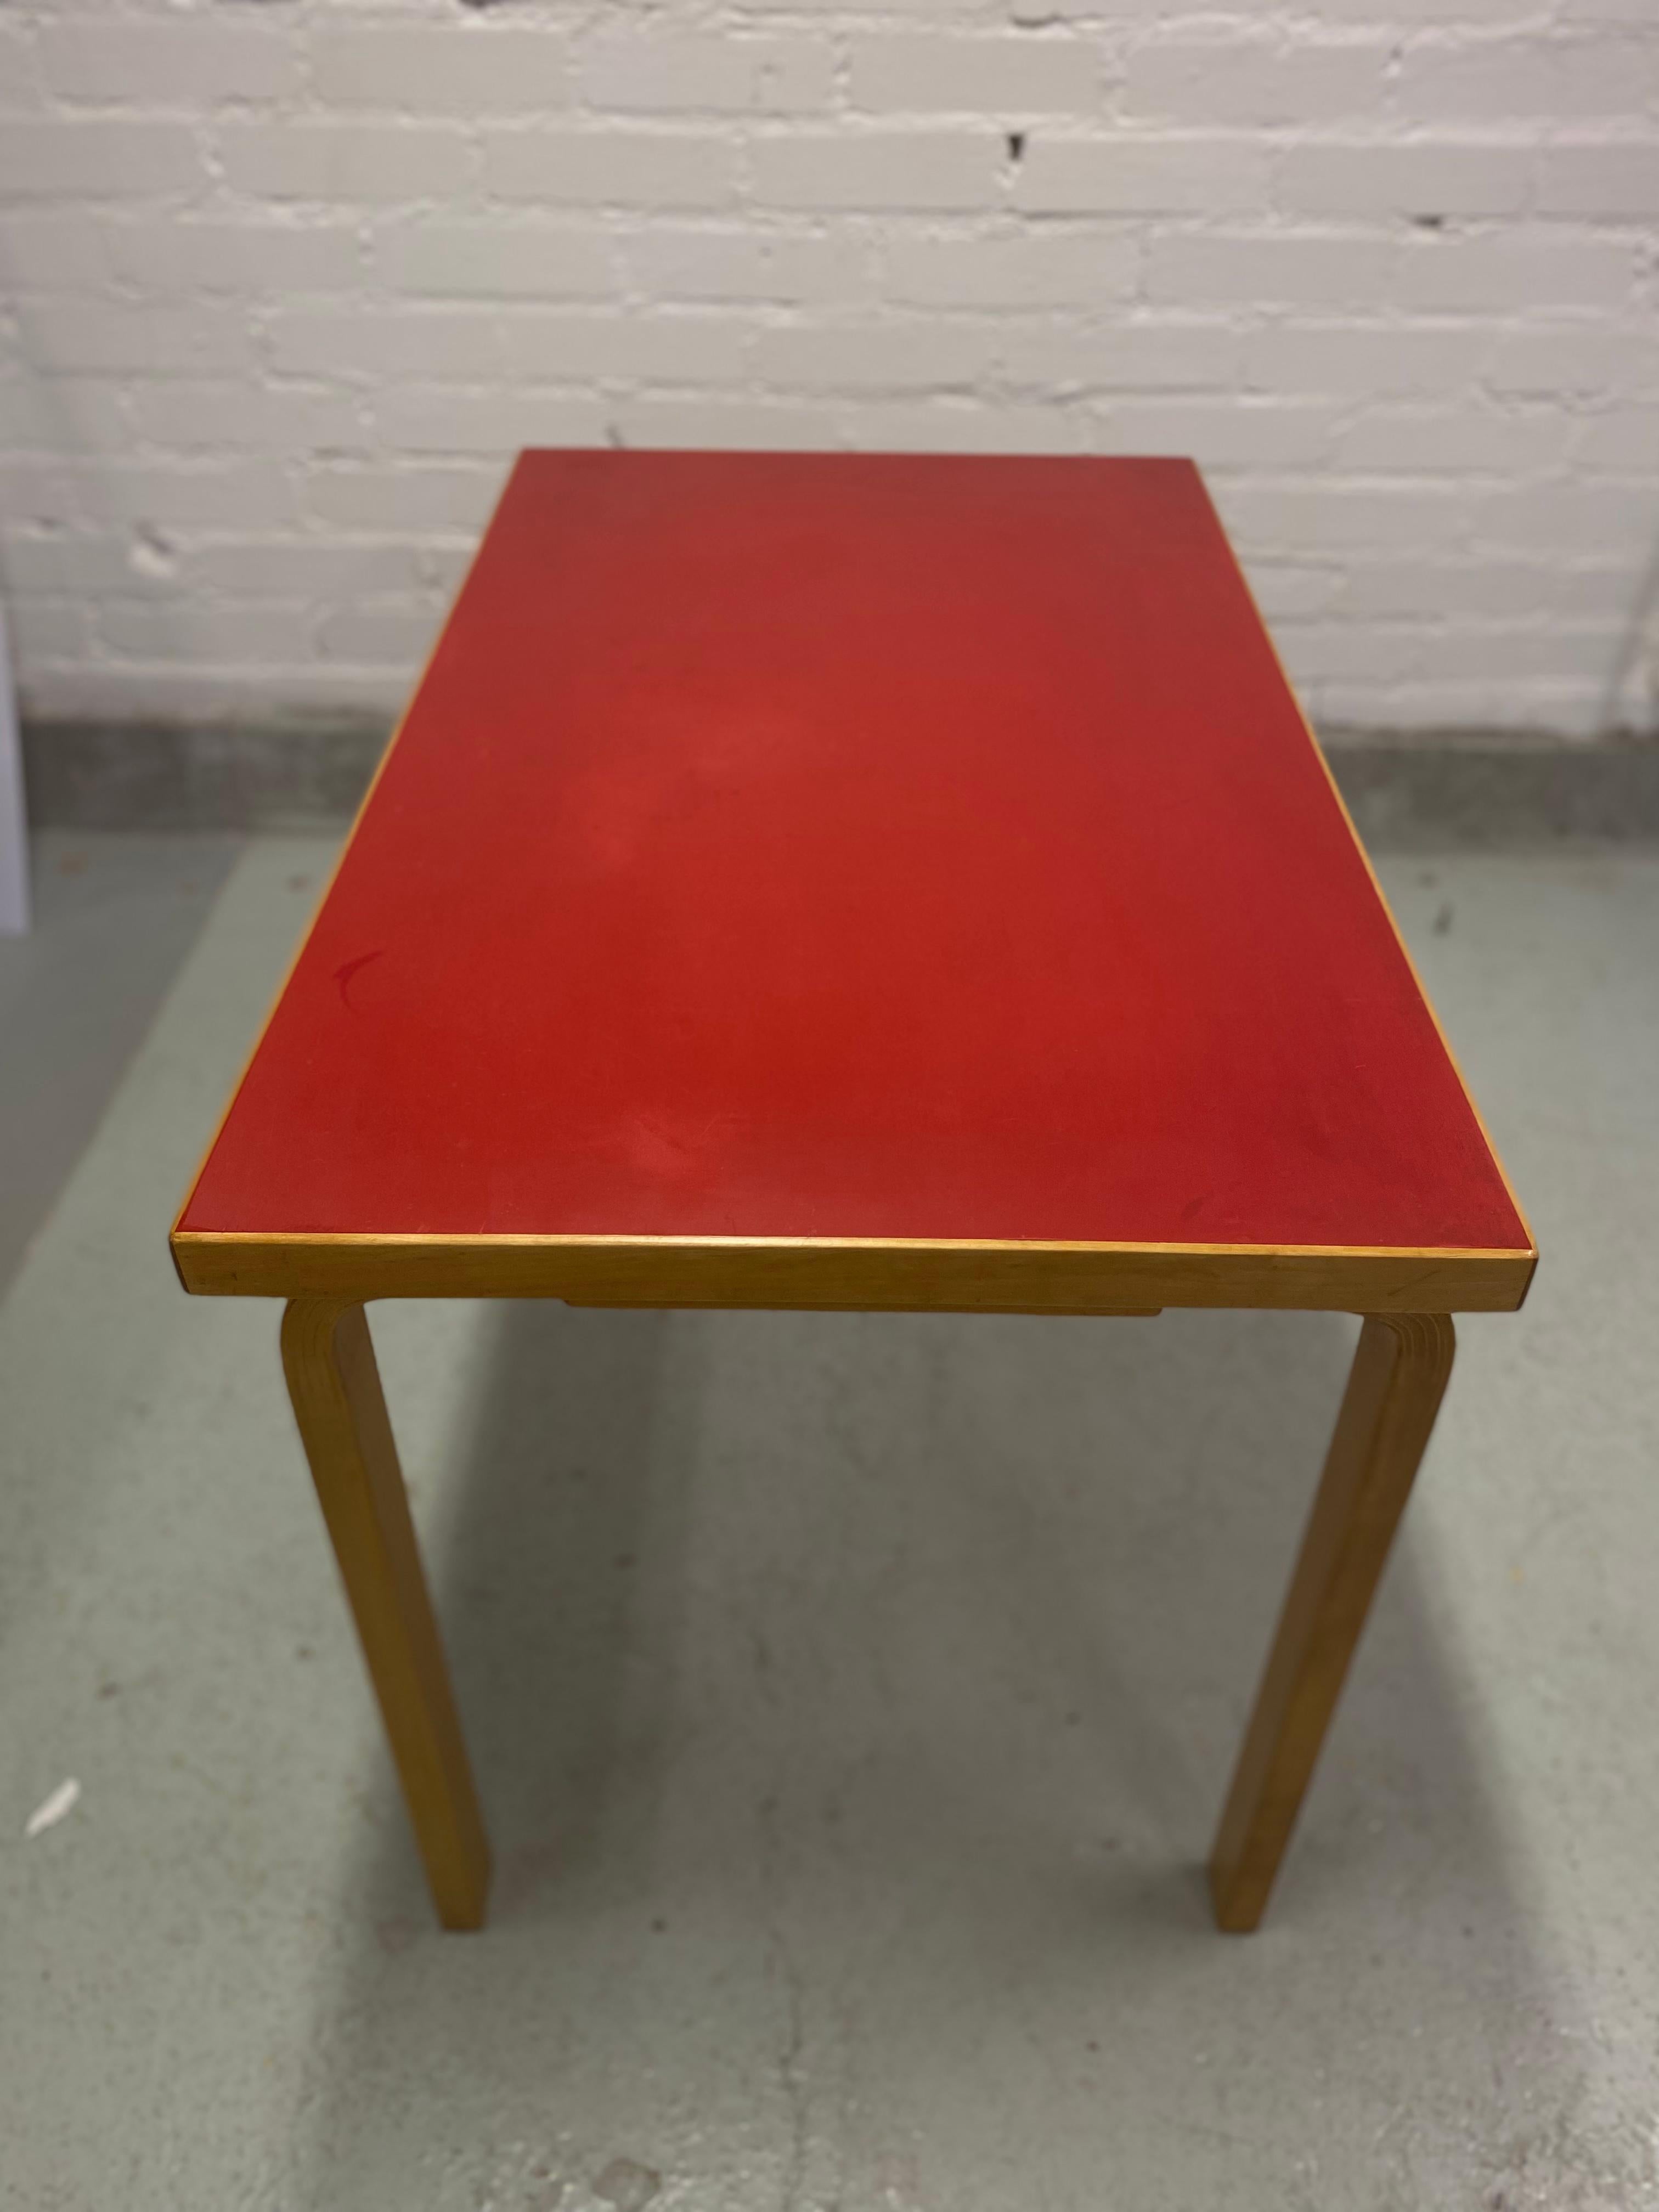 Alvar Aalto rectangular L-leg table in red linoleum top, manufactured by Oy Huonekalu-ja Rakennustyötehdas Ab and retailed by Artek since the 1930s. 

Alvar Aalto designs are famous worldwide for a number of reasons. Beauty and functionality are at